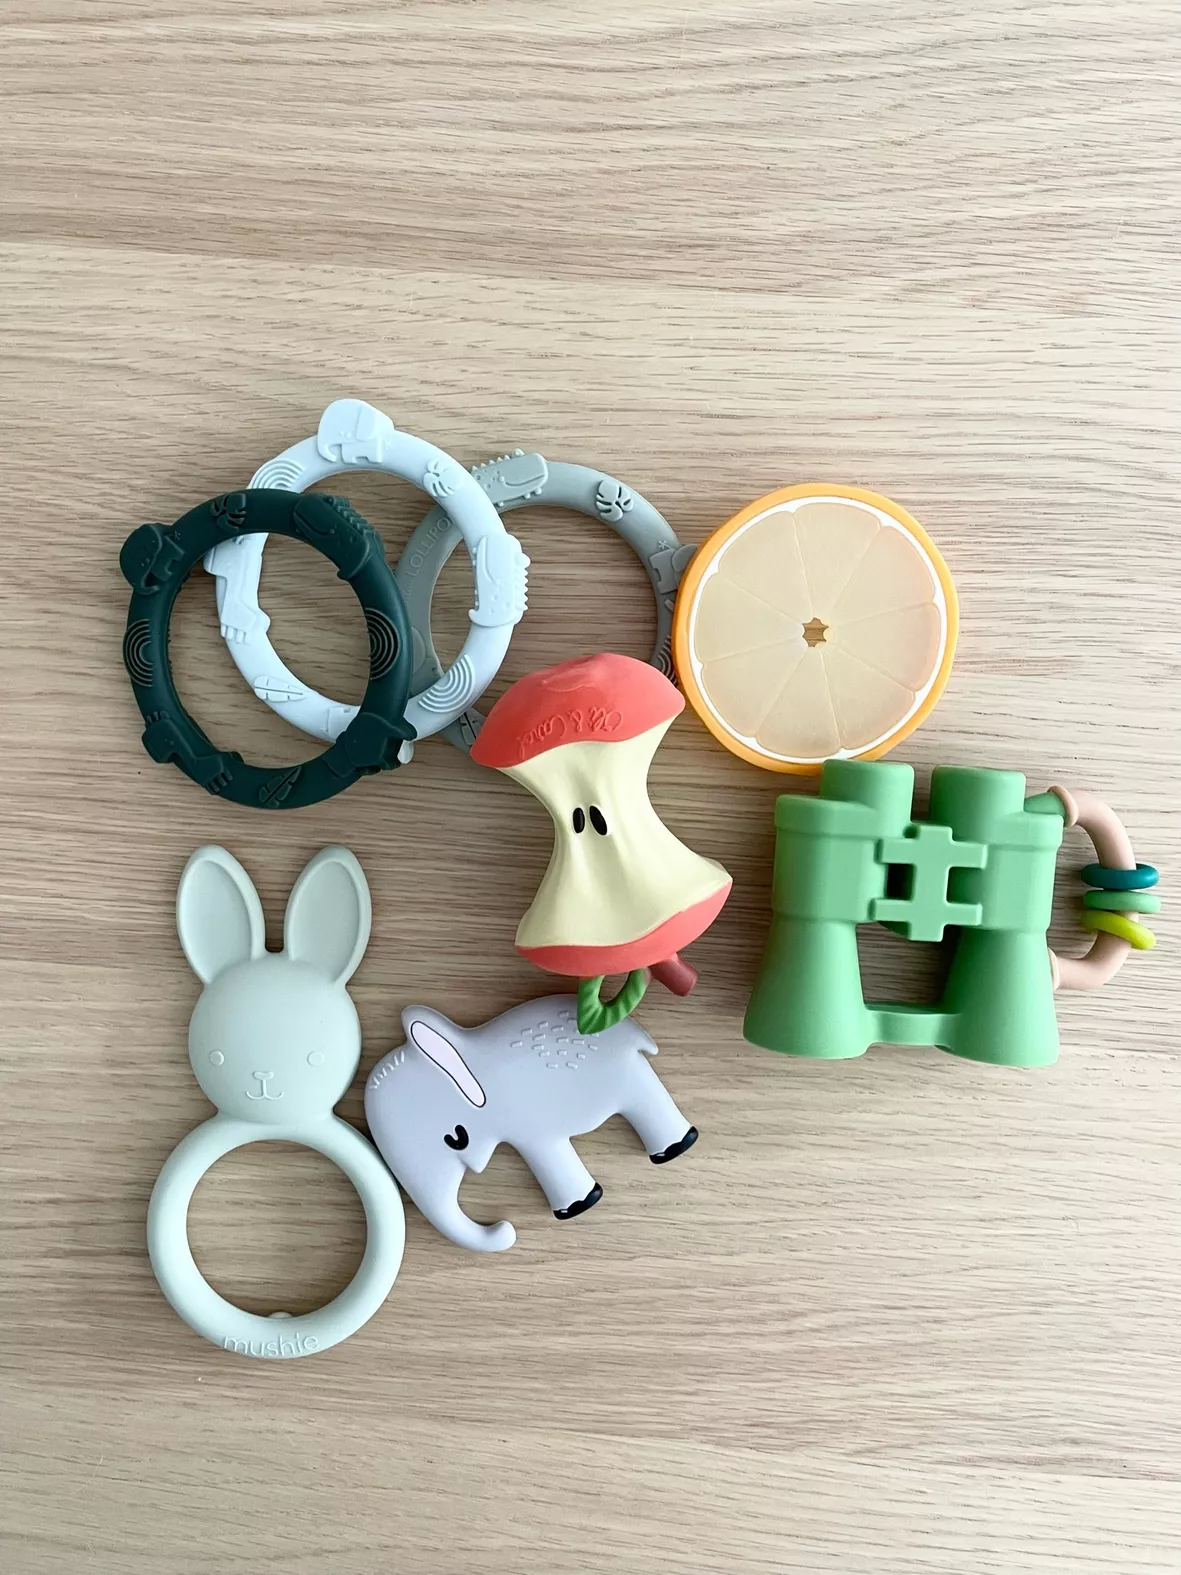  Oli & Carol Natural Rubber Teether -Vegetable Shaped Teething  Toy for Babies 0-12 Months, Baby Teething Relief, Teethers for Infants  0-6 & 6-12 Months